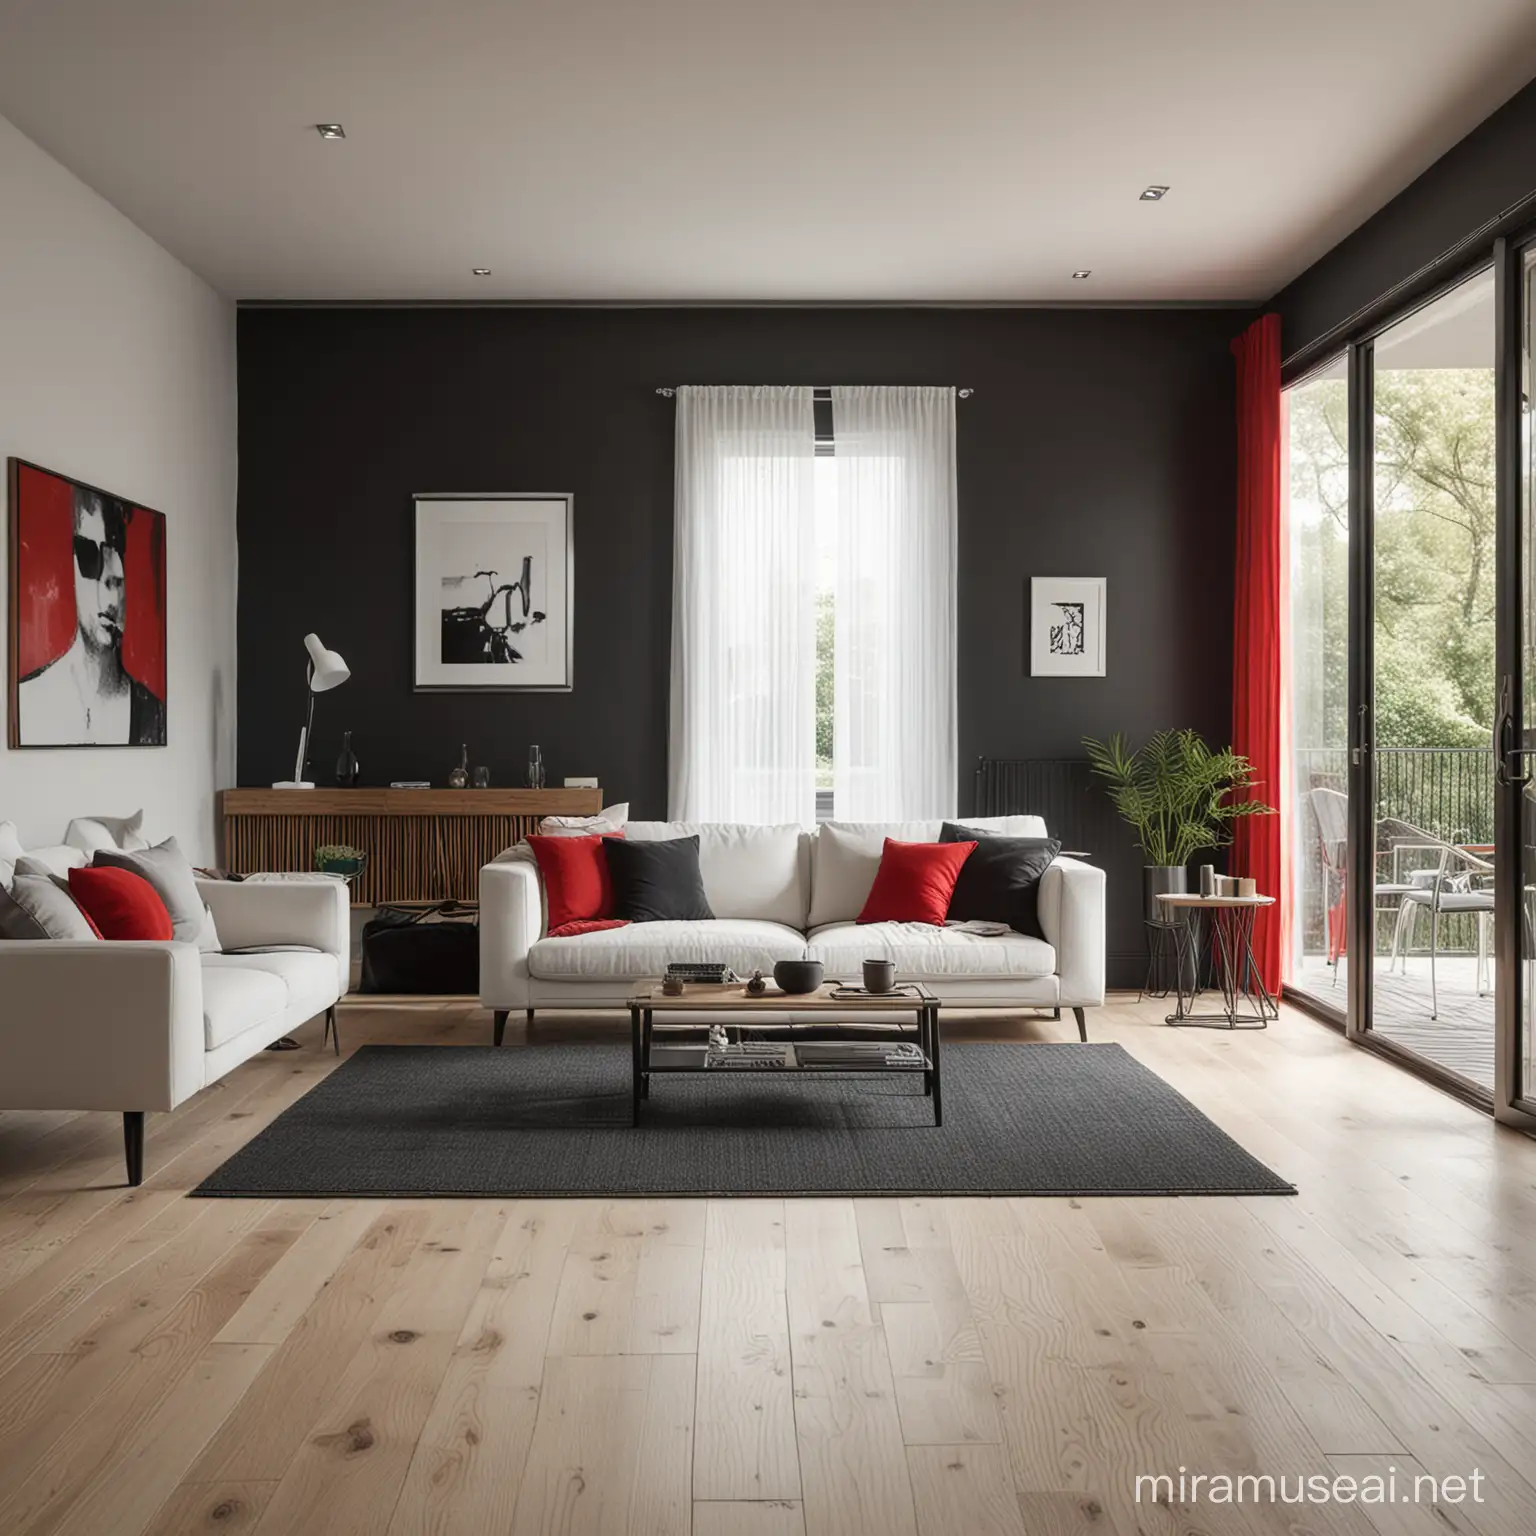 A living room in white and black. It has a wooden floor. A rectangular work hangs upright behind the red sofa. Real, lively, detailed, light and shadow